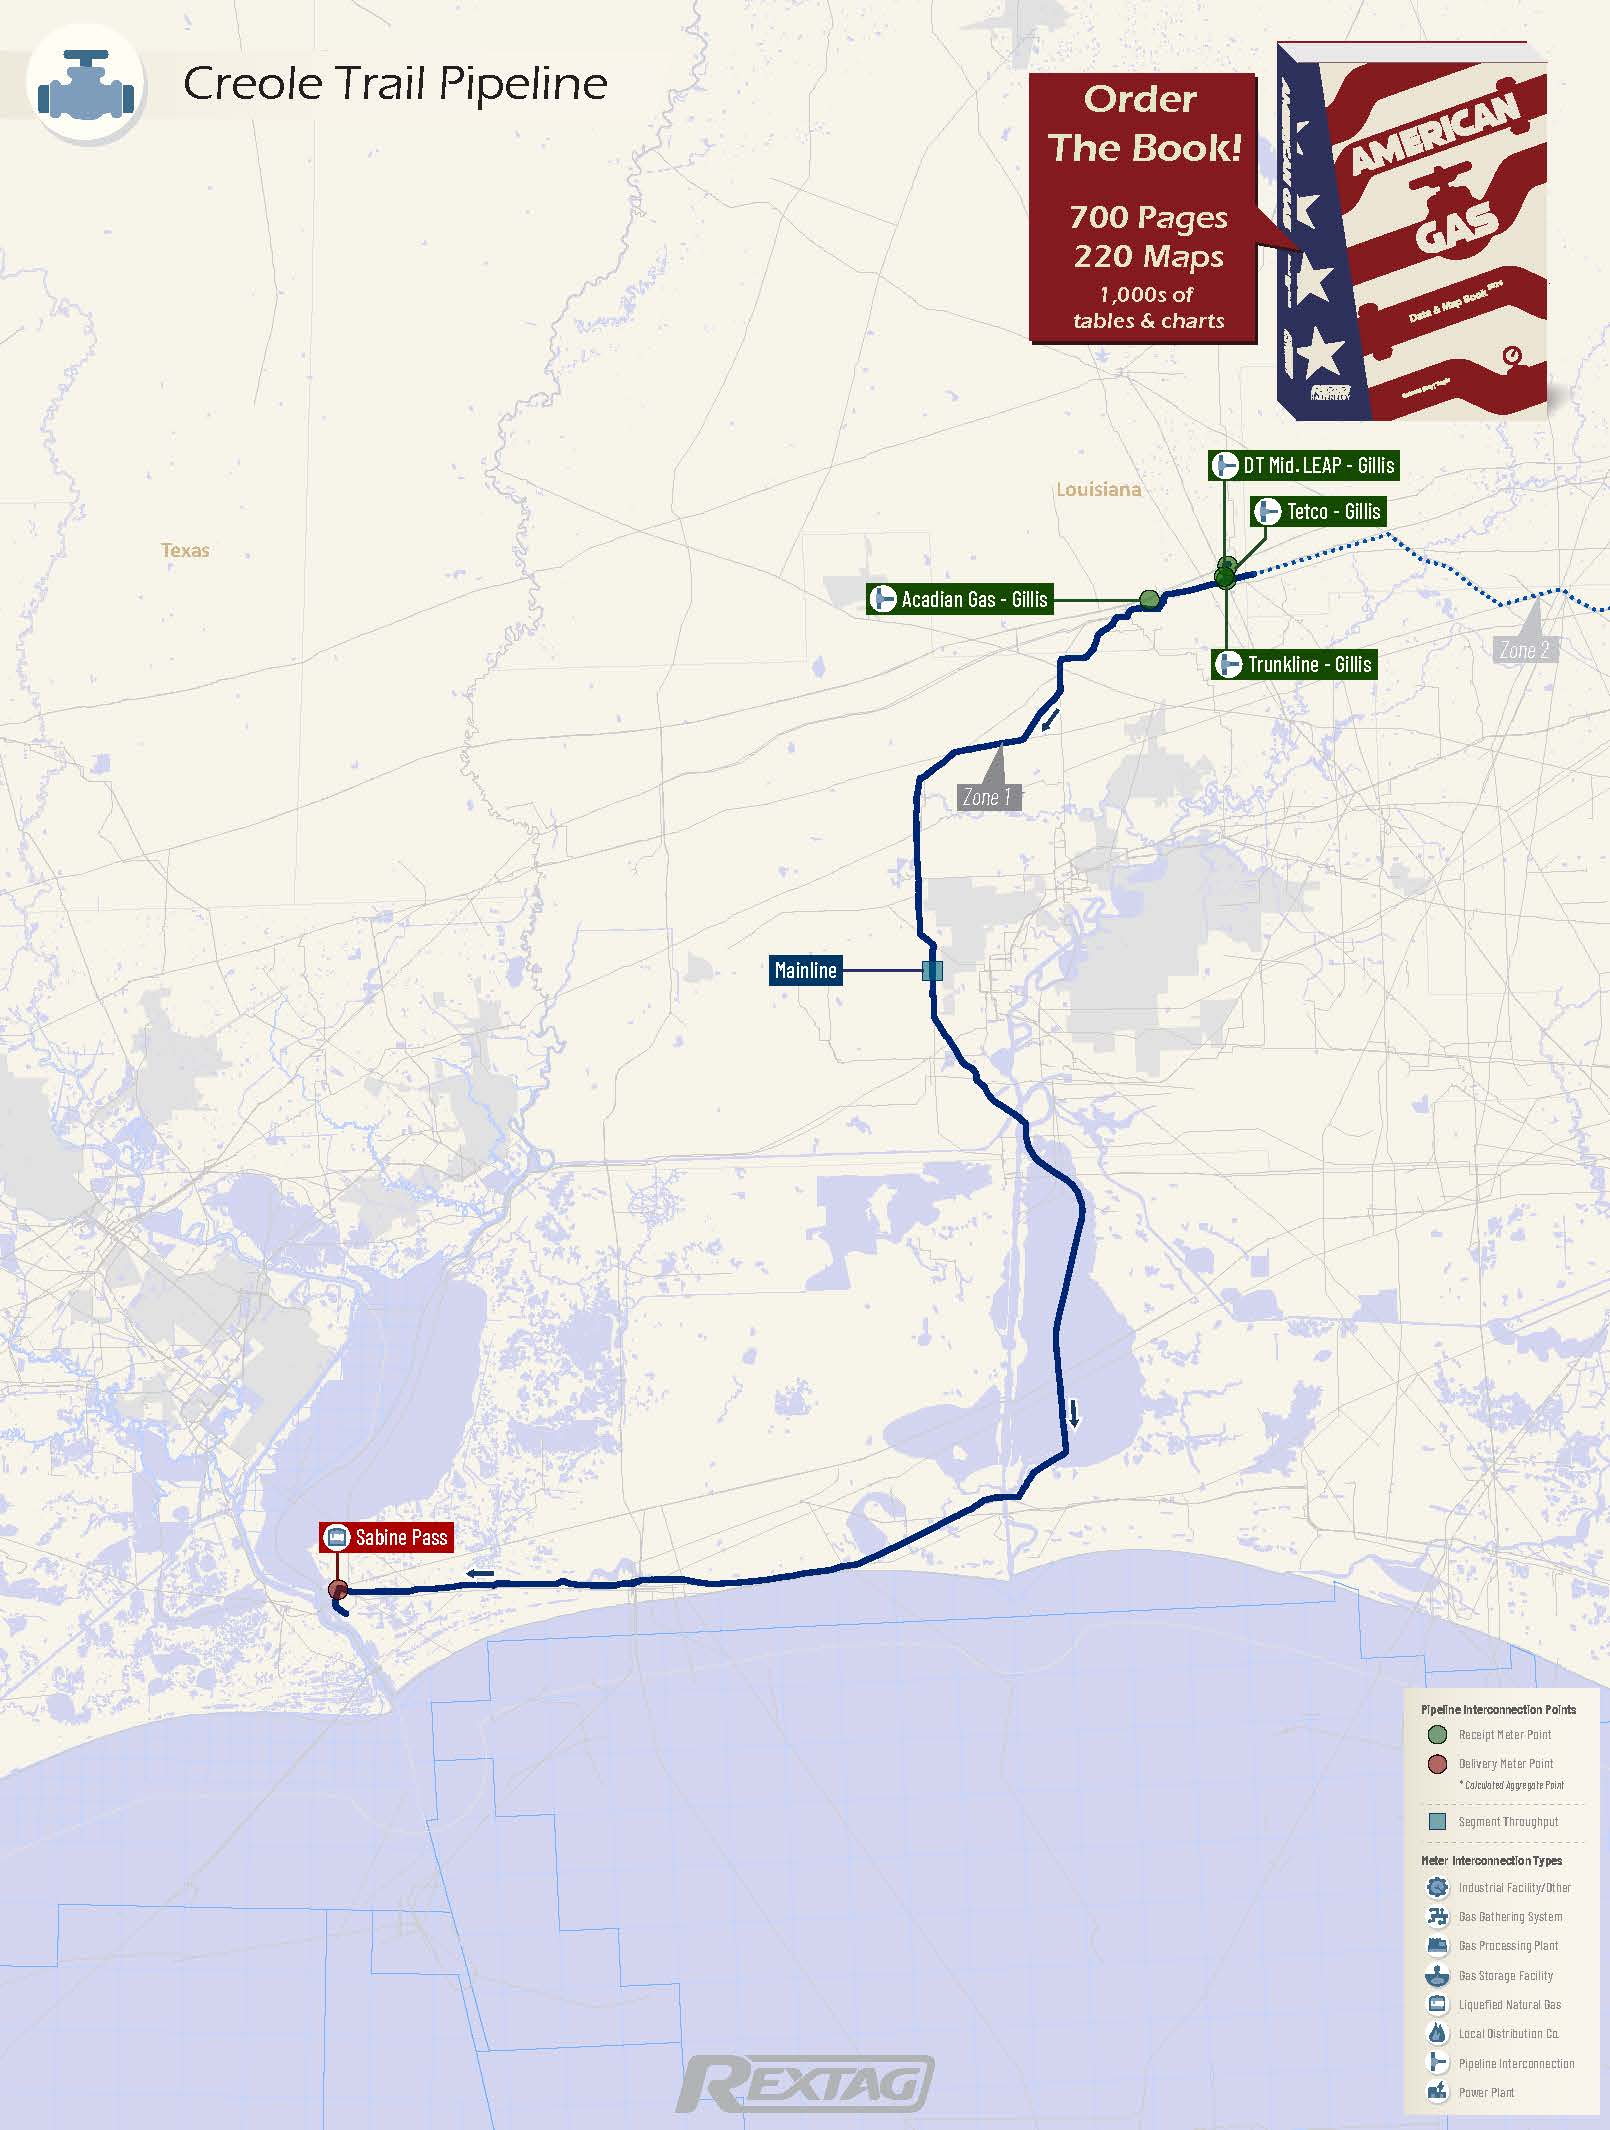 Creole Trail Pipeline